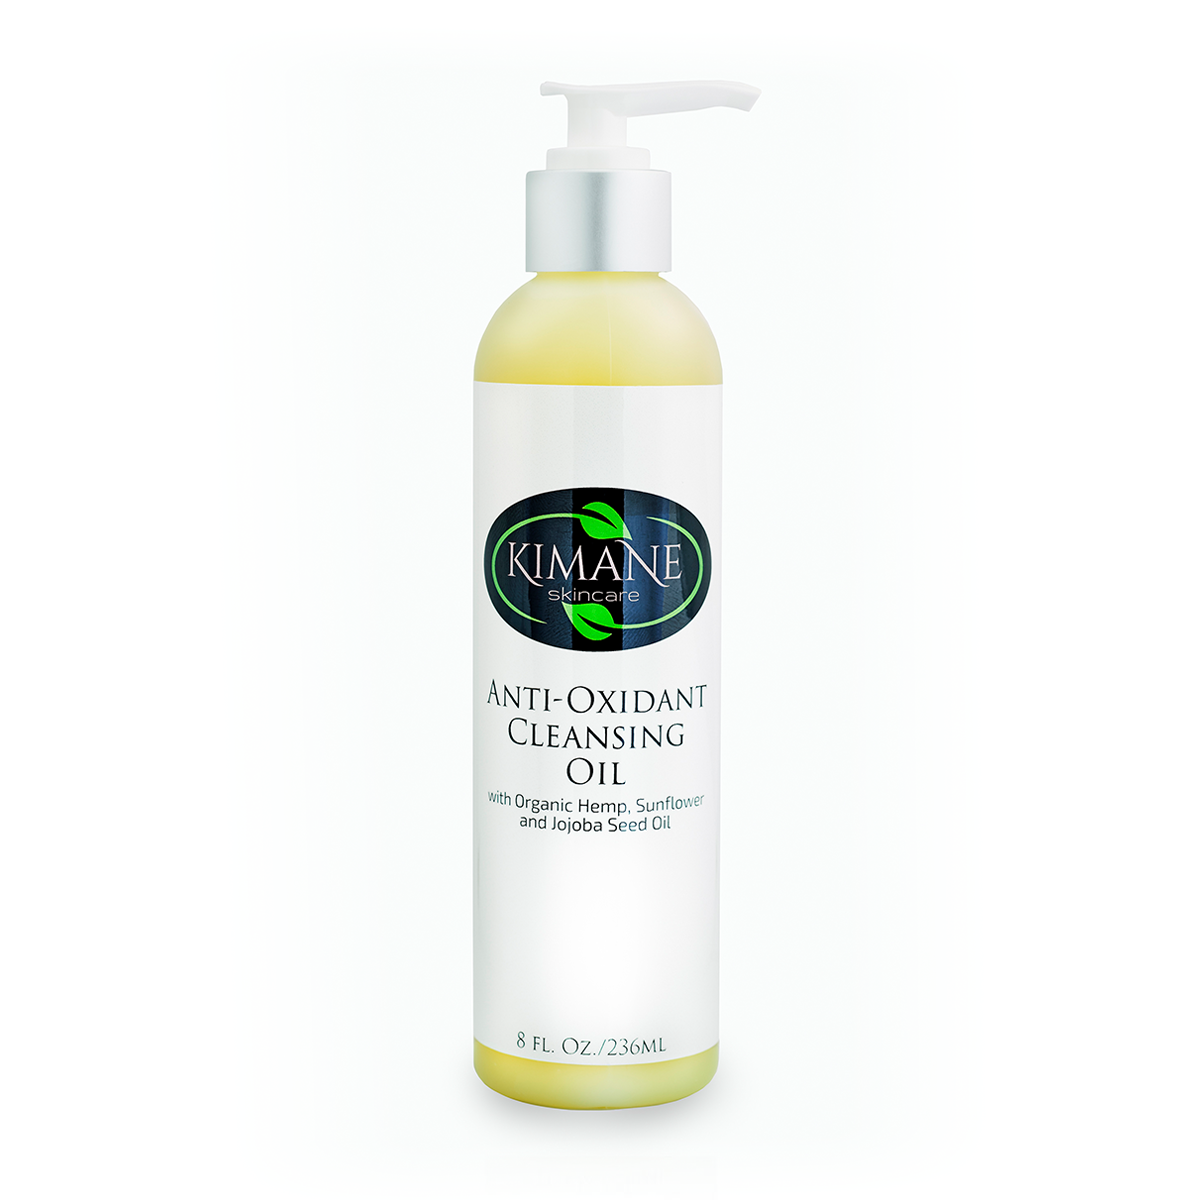 Anti-Oxidant Cleansing Oil